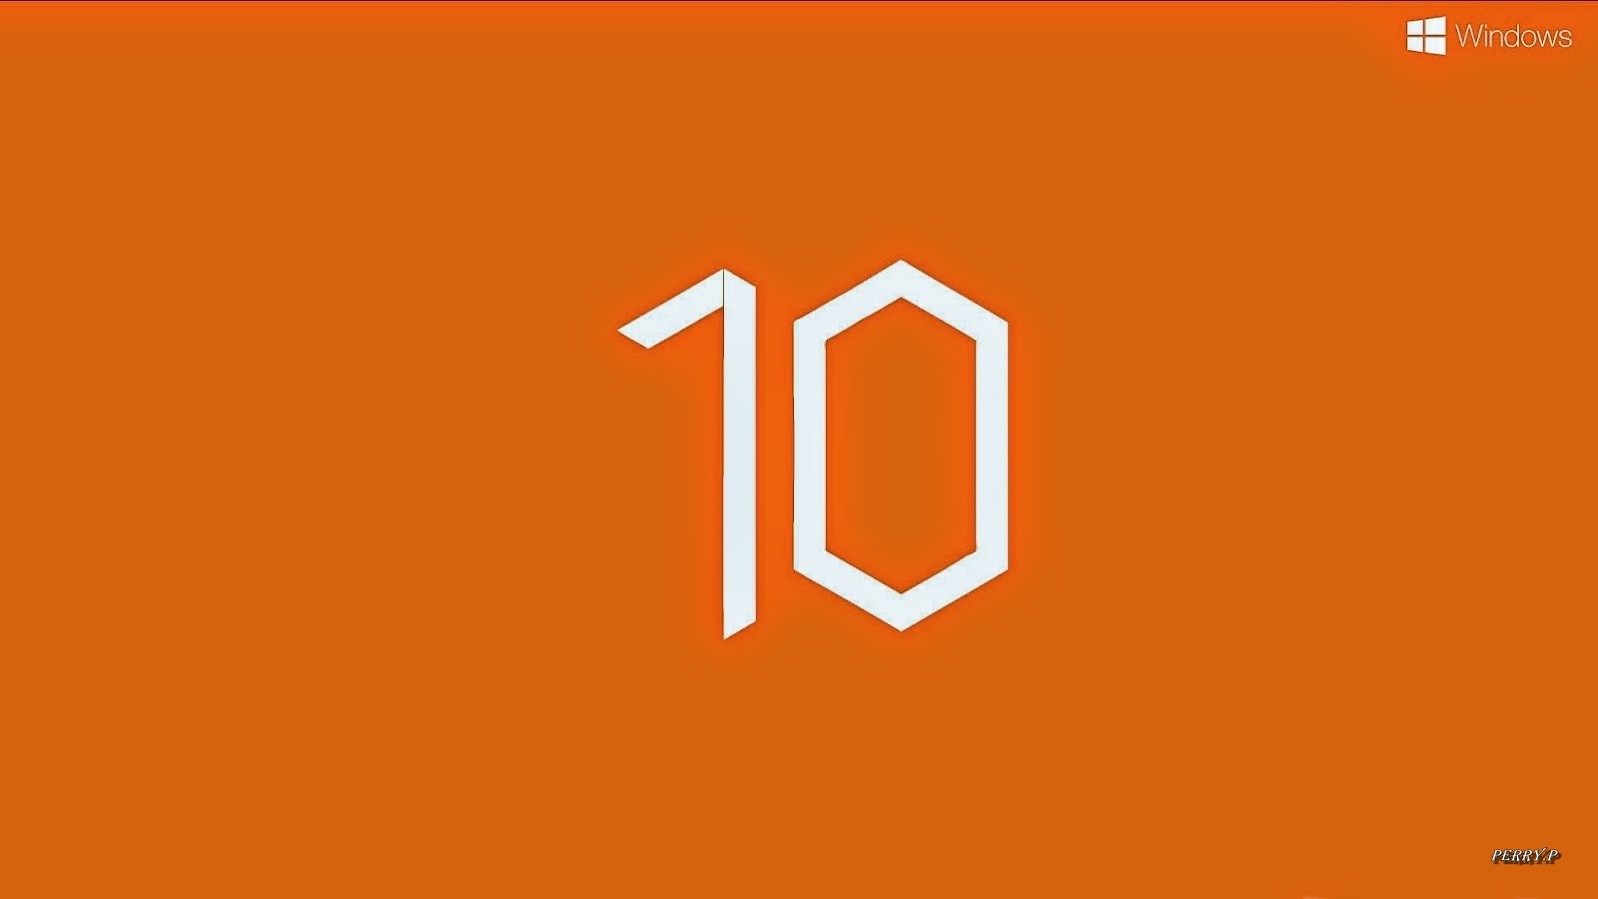 General 1598x899 Windows 10 numbers orange background operating system simple background